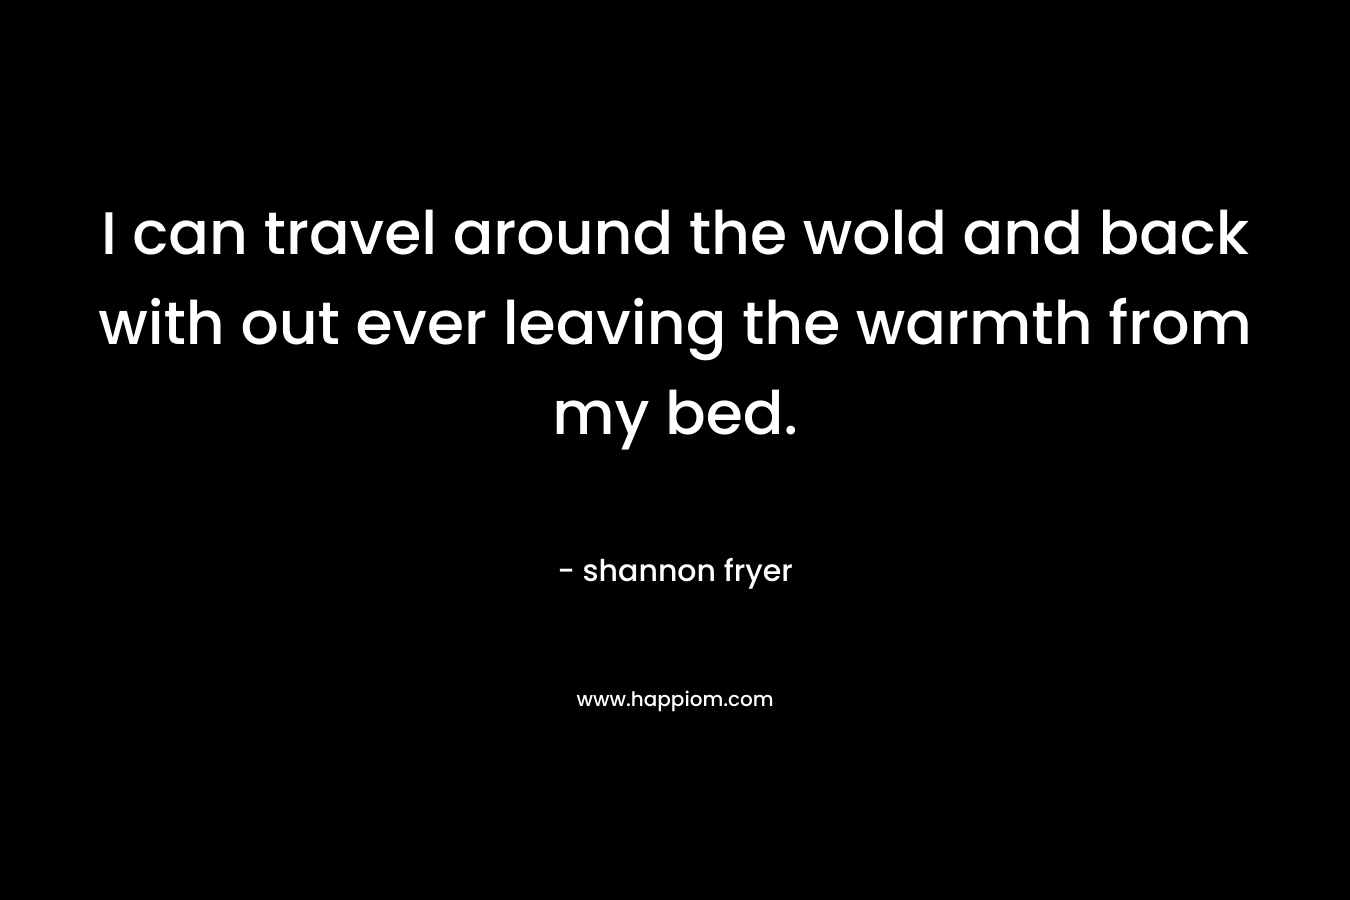 I can travel around the wold and back with out ever leaving the warmth from my bed.